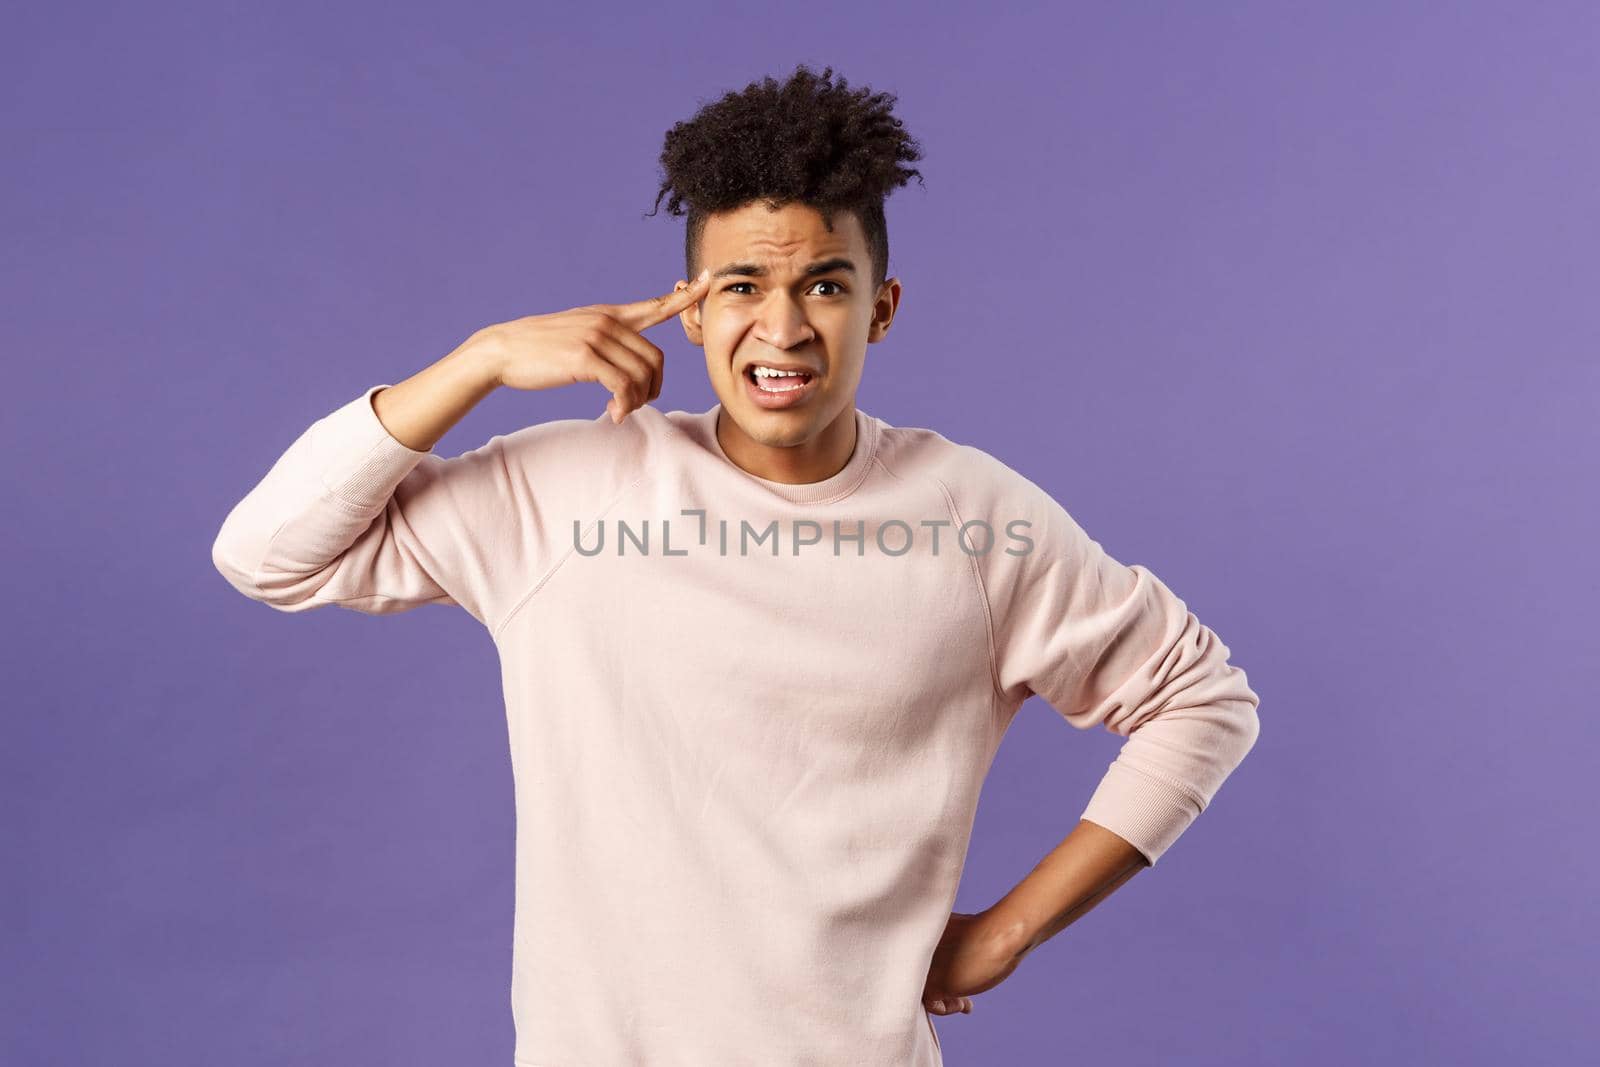 Portrait of angry, annoyed young man scolding someone from being stupid and crazy, rolling index finger over temple staring outraged and irritated camera, standing bothered purple background by Benzoix